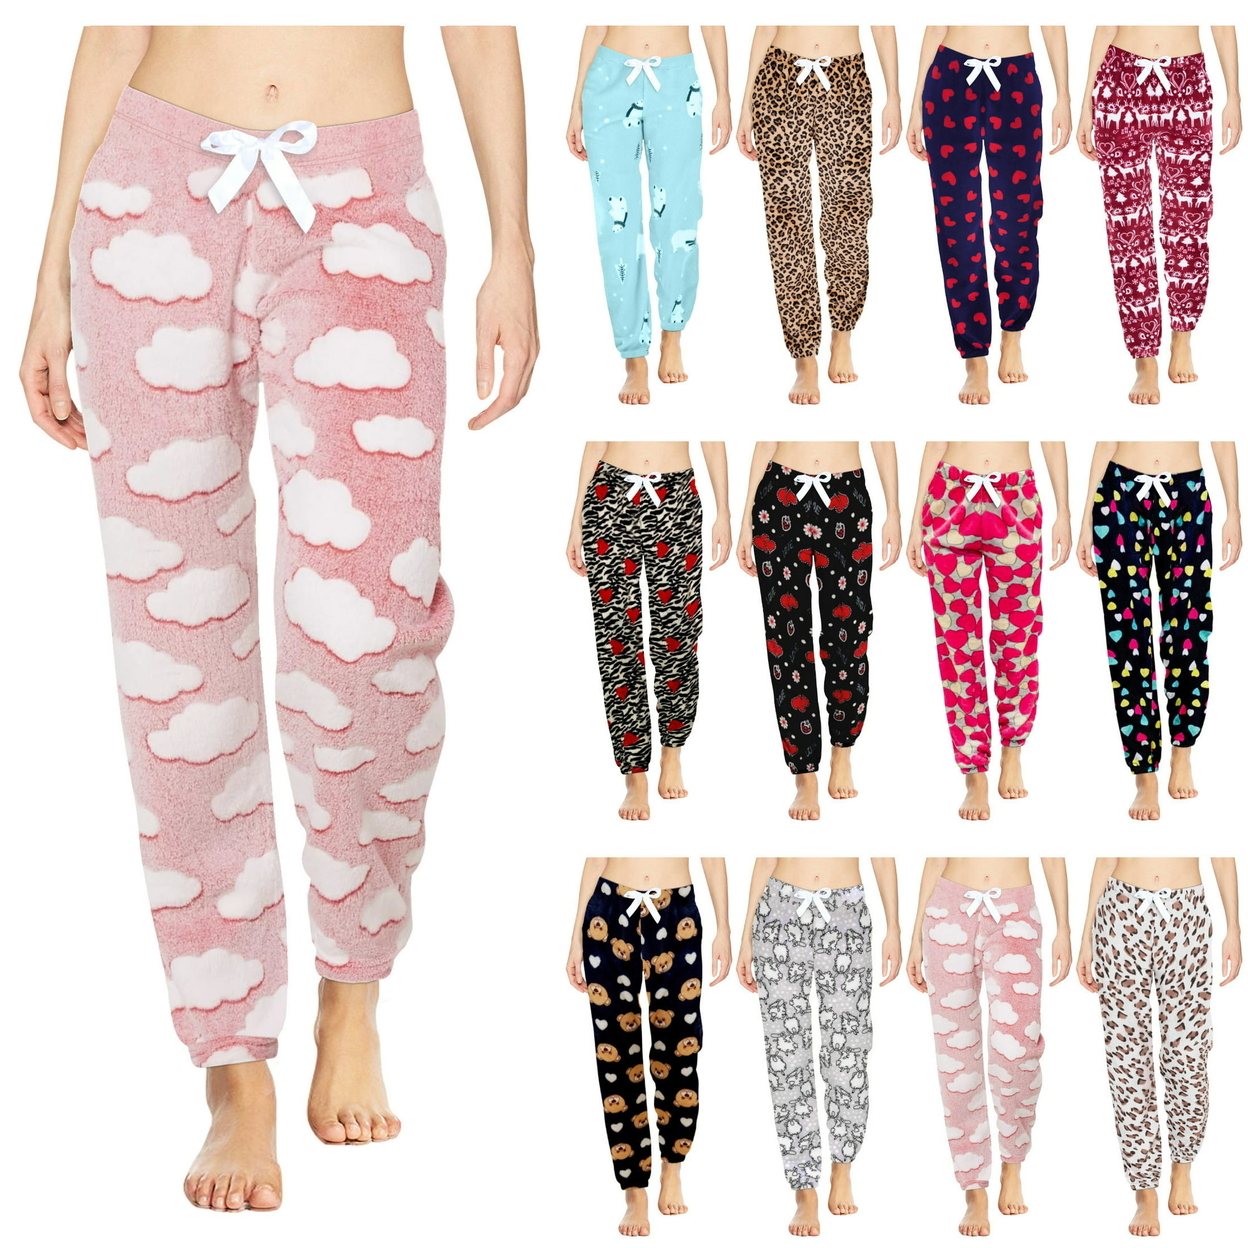 3-Pack: Women's Solid & Printed Ultra-Soft Comfy Stretch Micro-Fleece Pajama Lounge Pants - Small, Solid